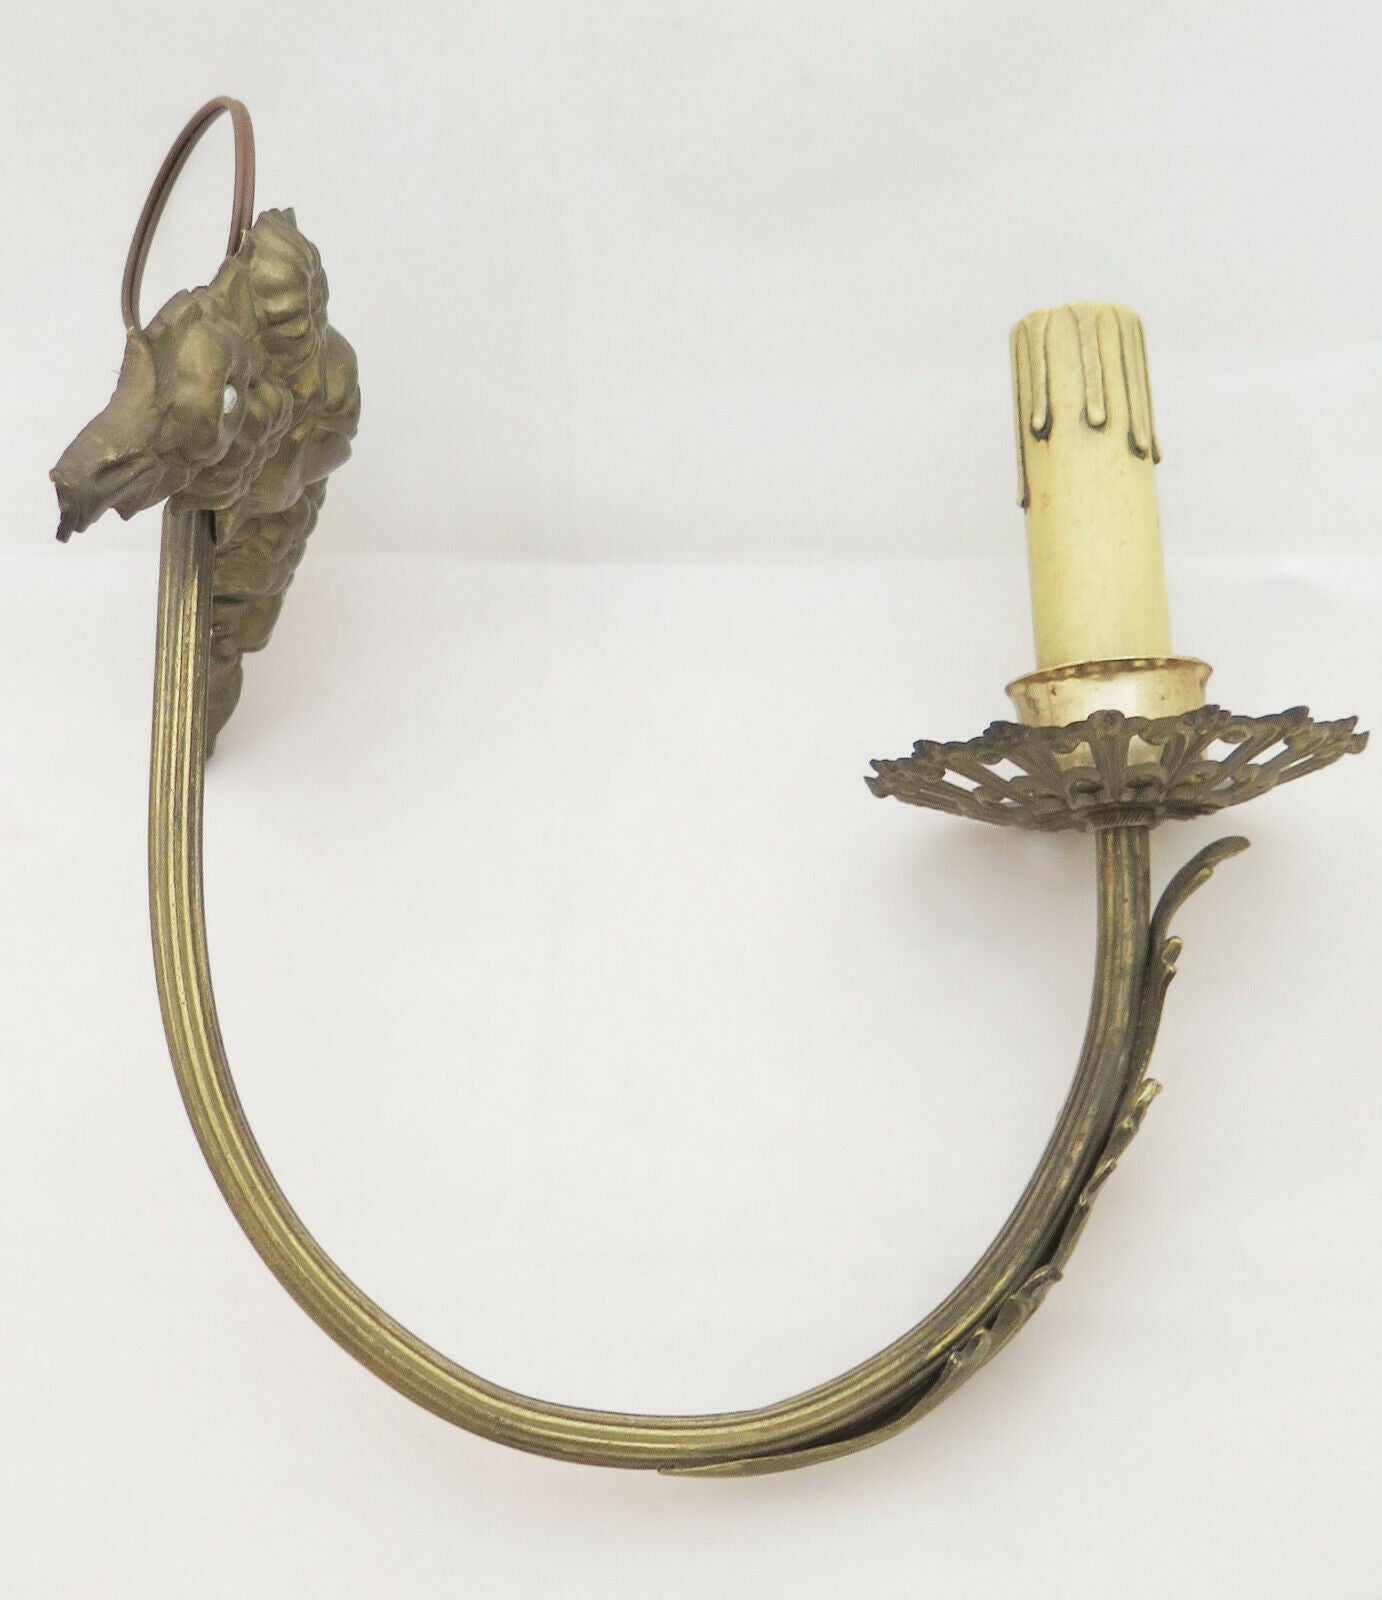 ANTIQUE BRONZE WALL LIGHT WITH ONE FLAME EARLY 20TH CENTURY WALL CANDLESTICK CH2